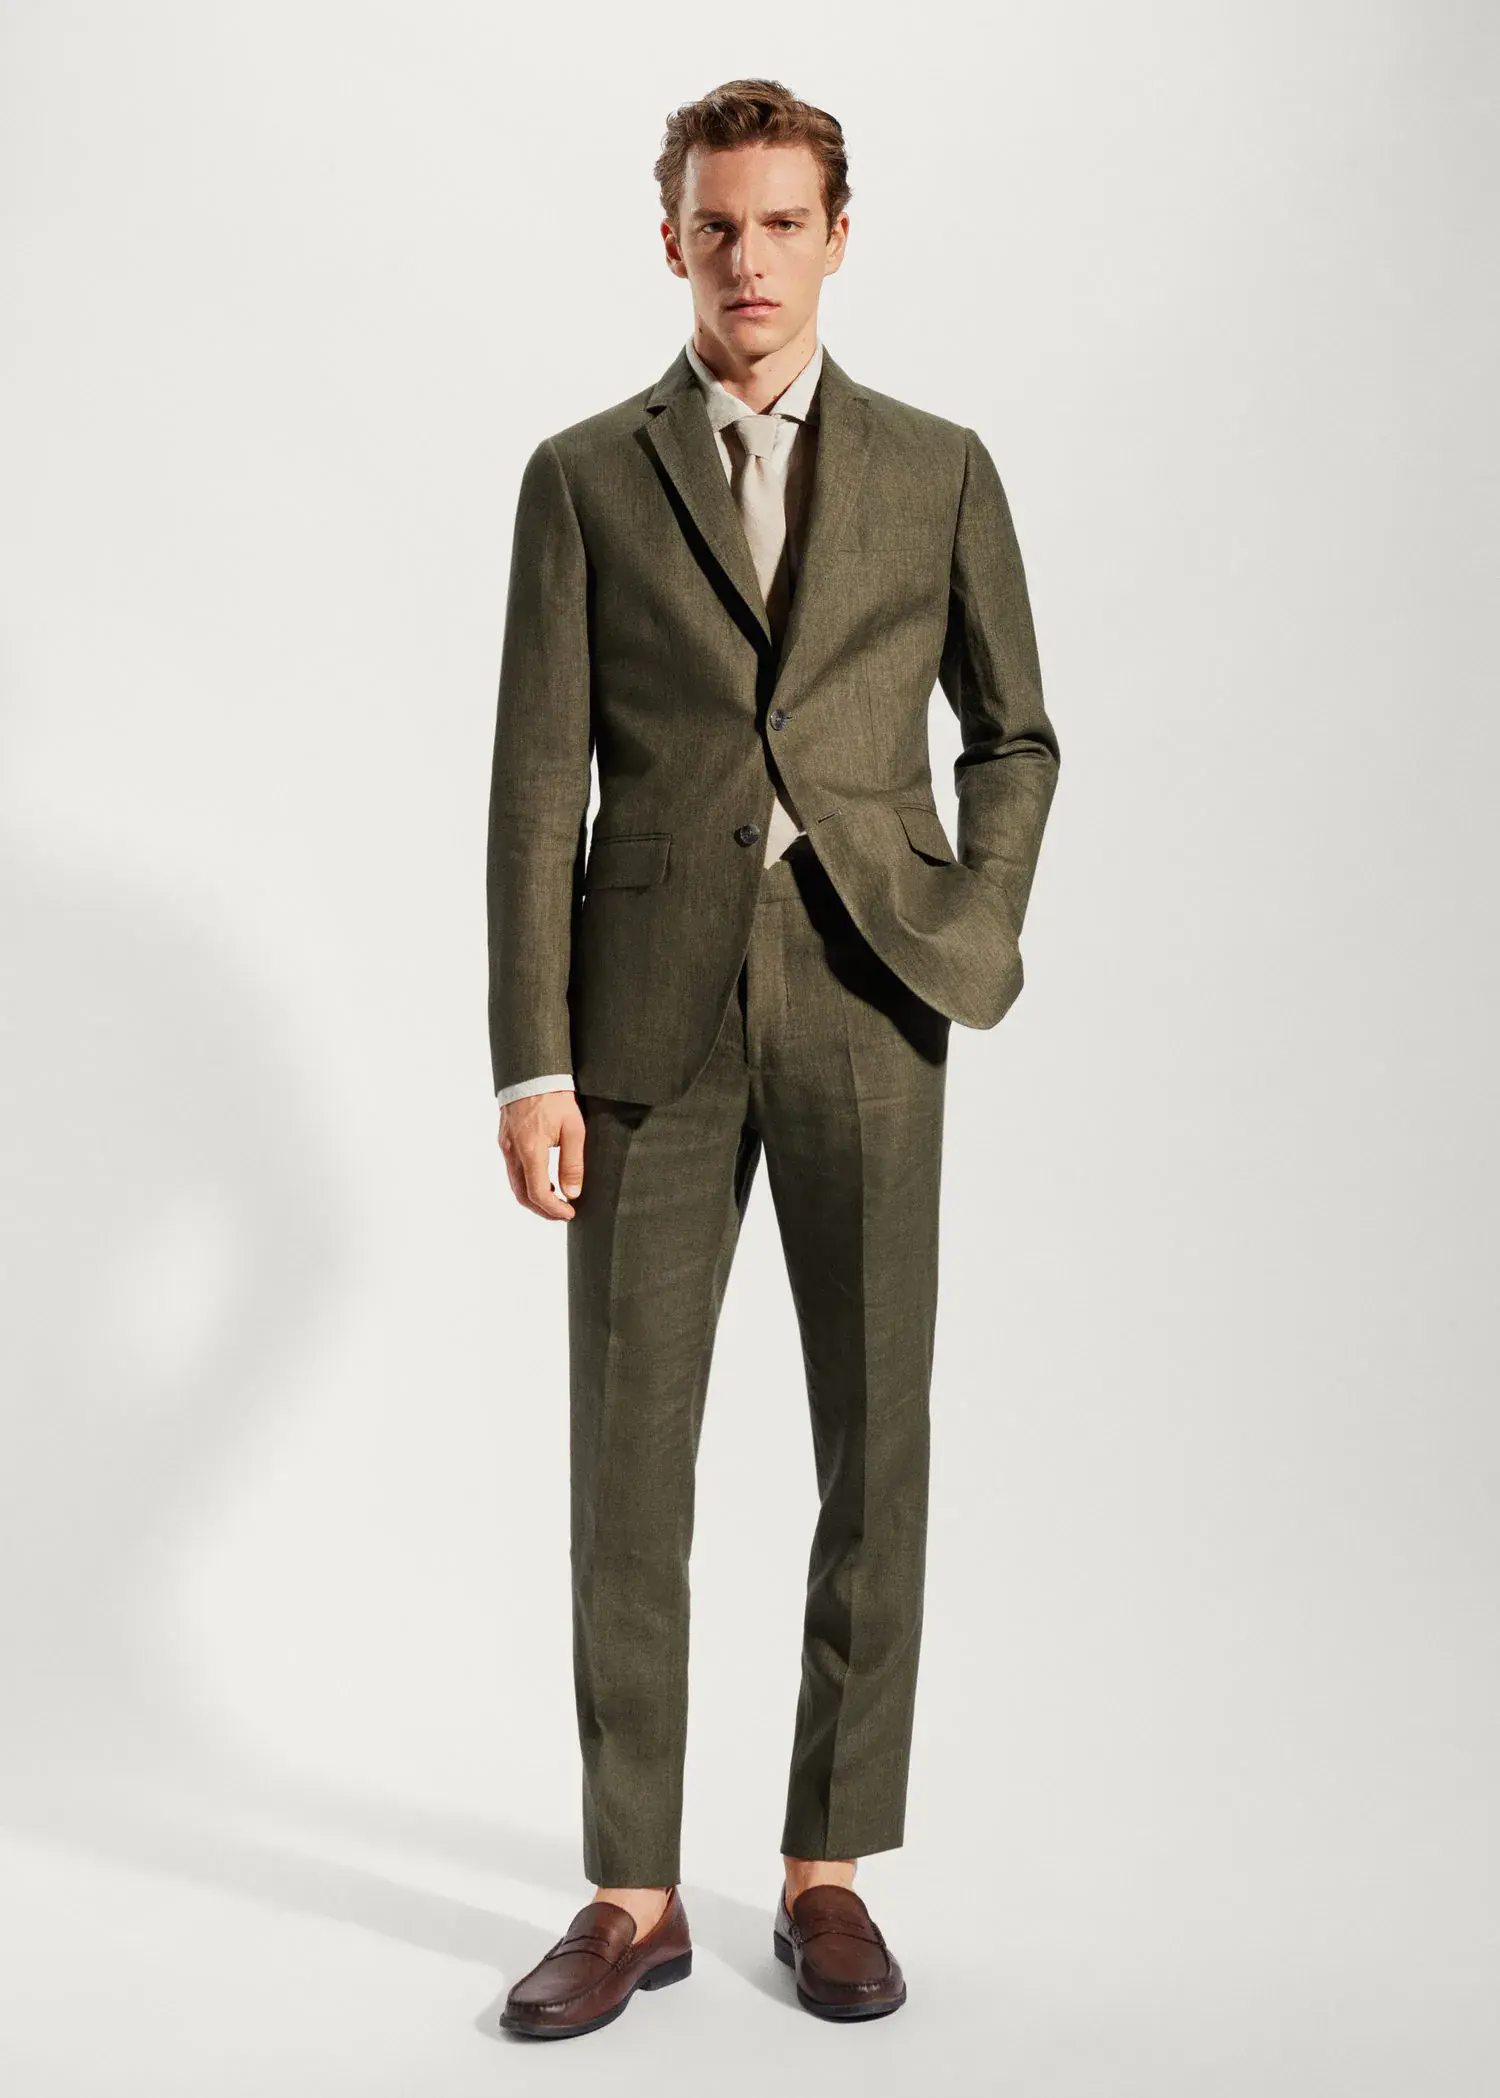 Mango 100% linen suit blazer. a man wearing a suit and tie standing next to a wall. 